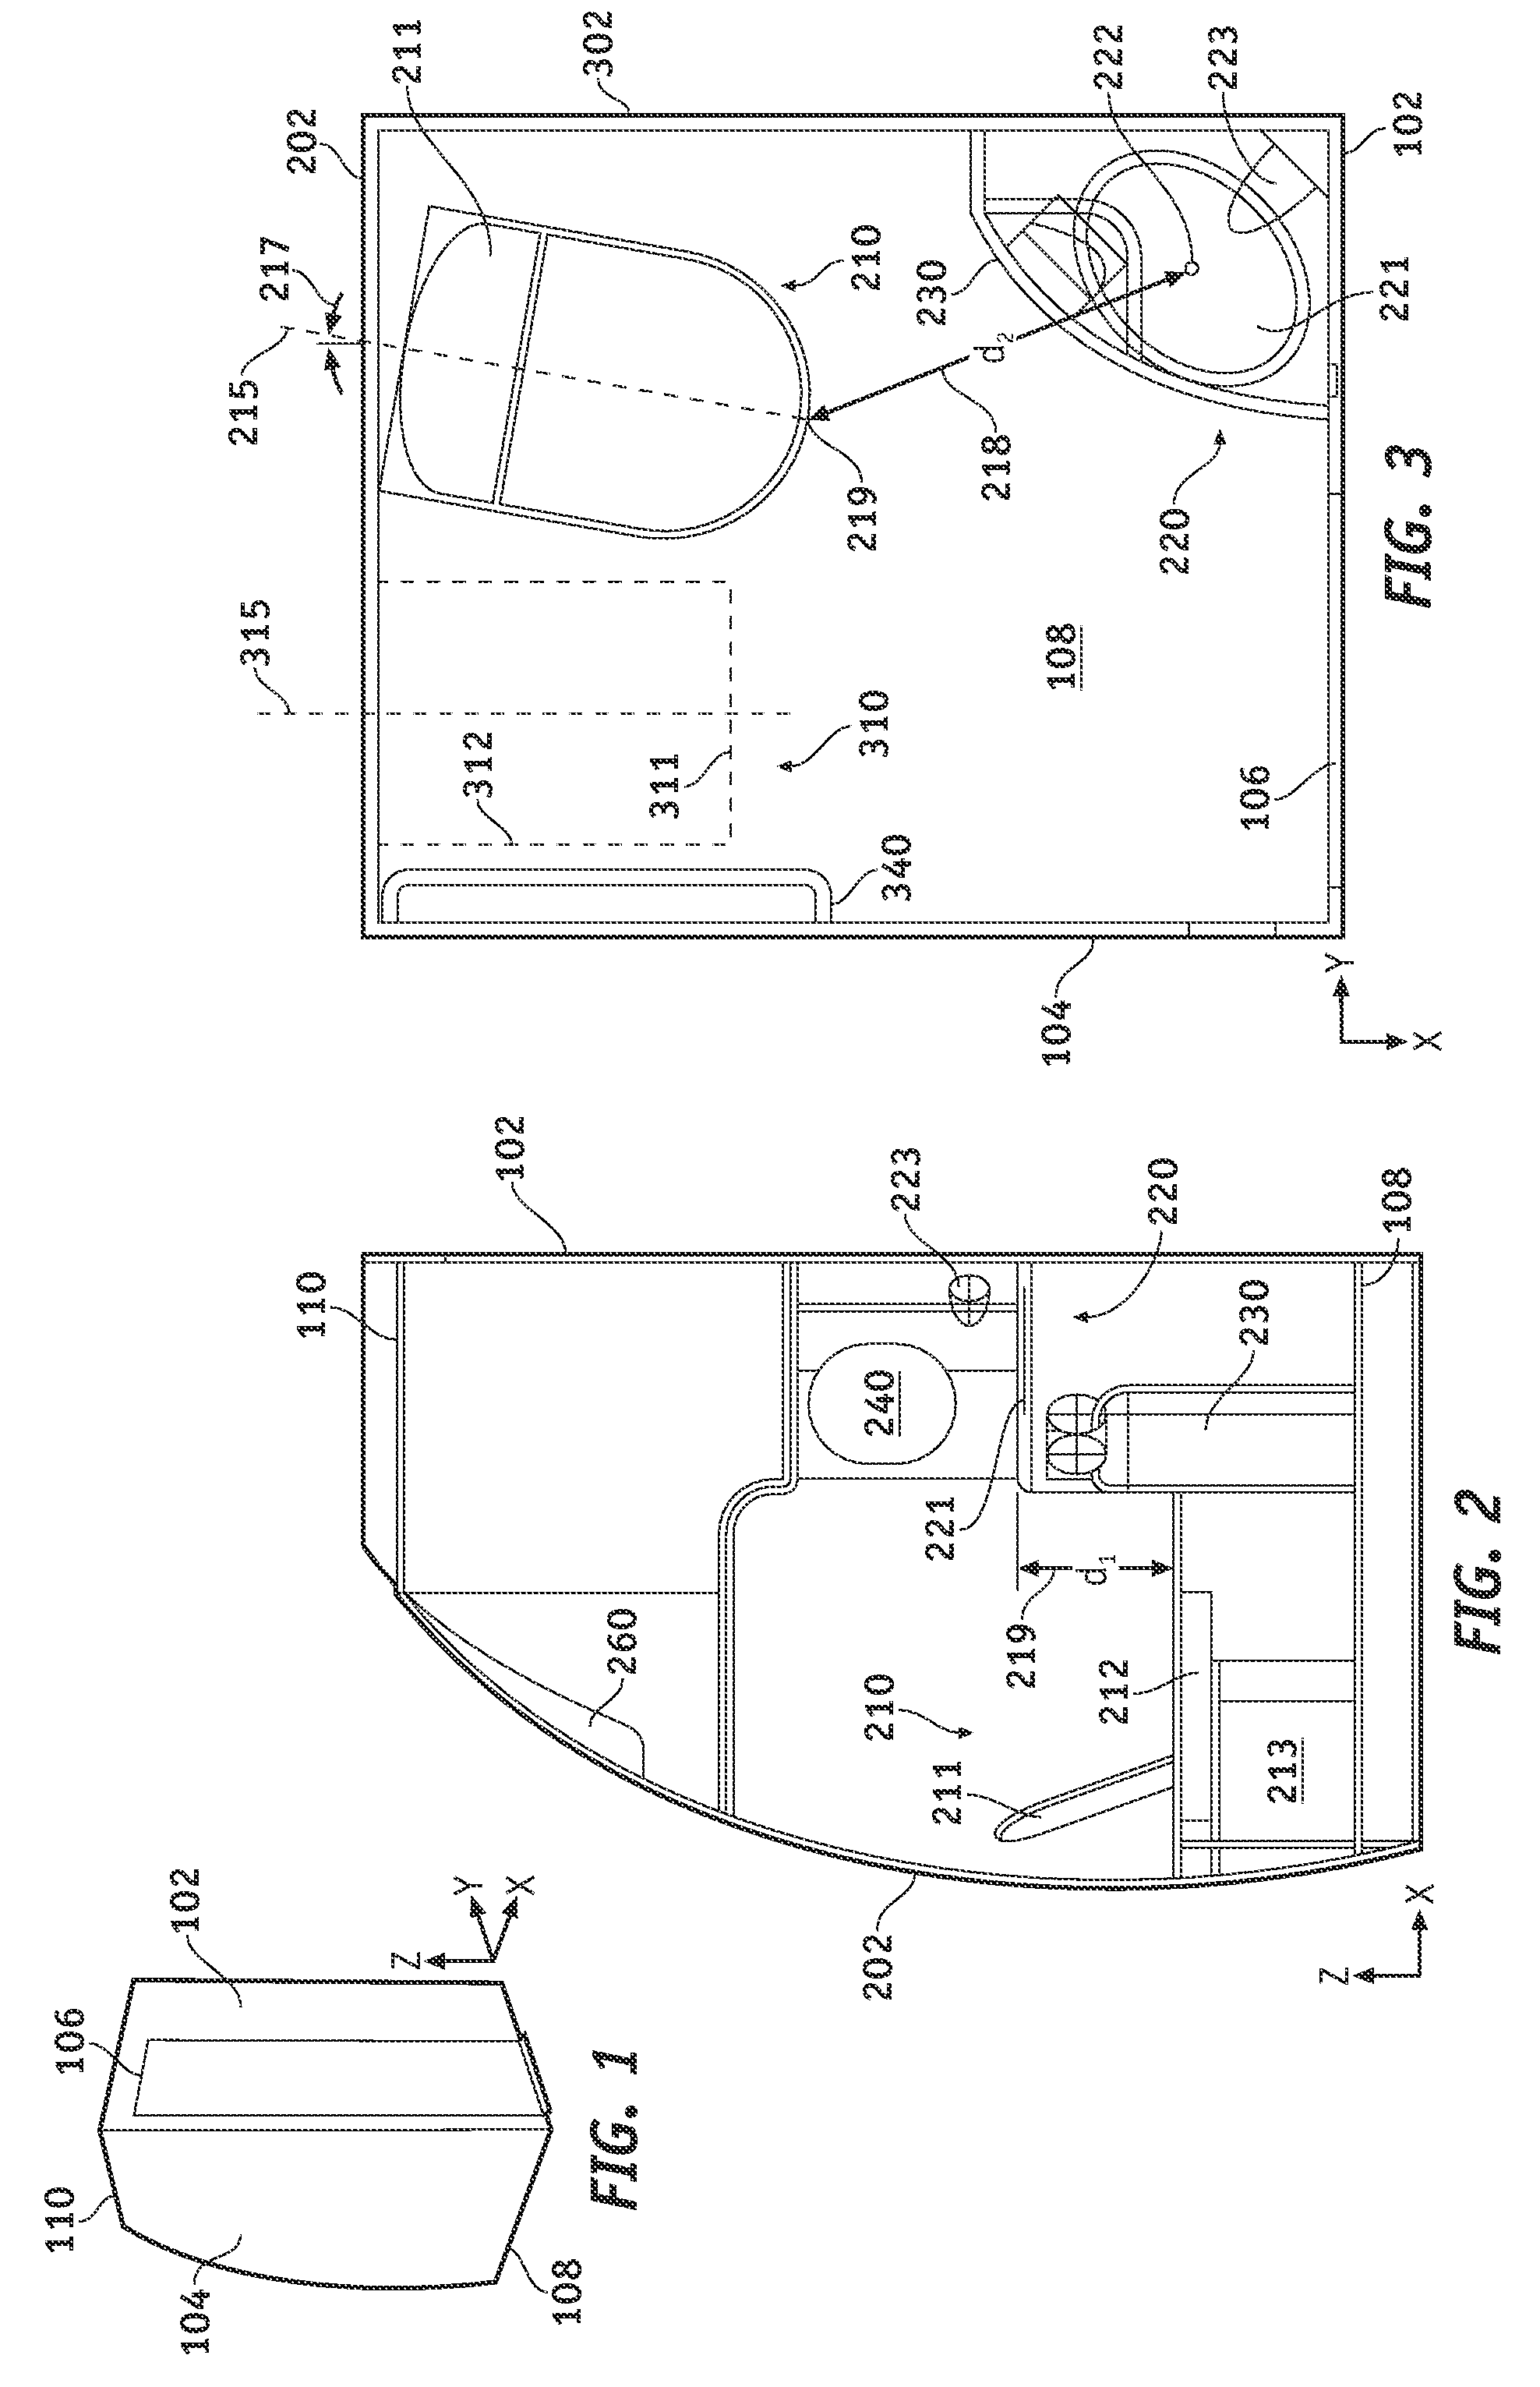 Methods and apparatus for an aircraft lavoratory